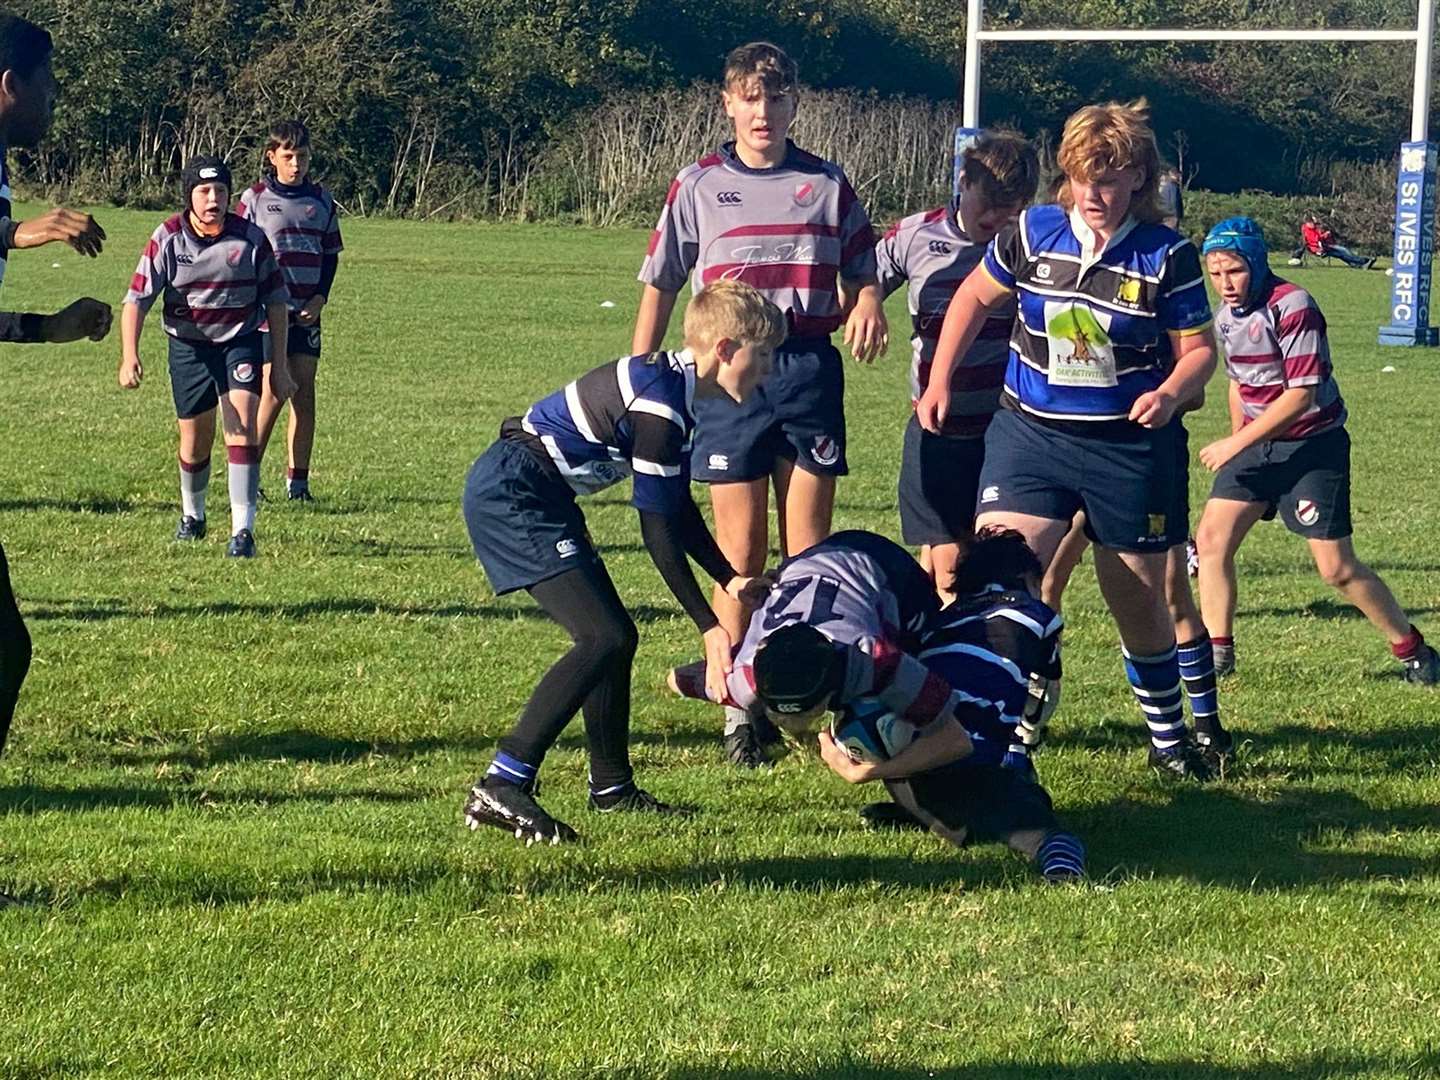 Action from the game between St Ives and West Norfolk U13s